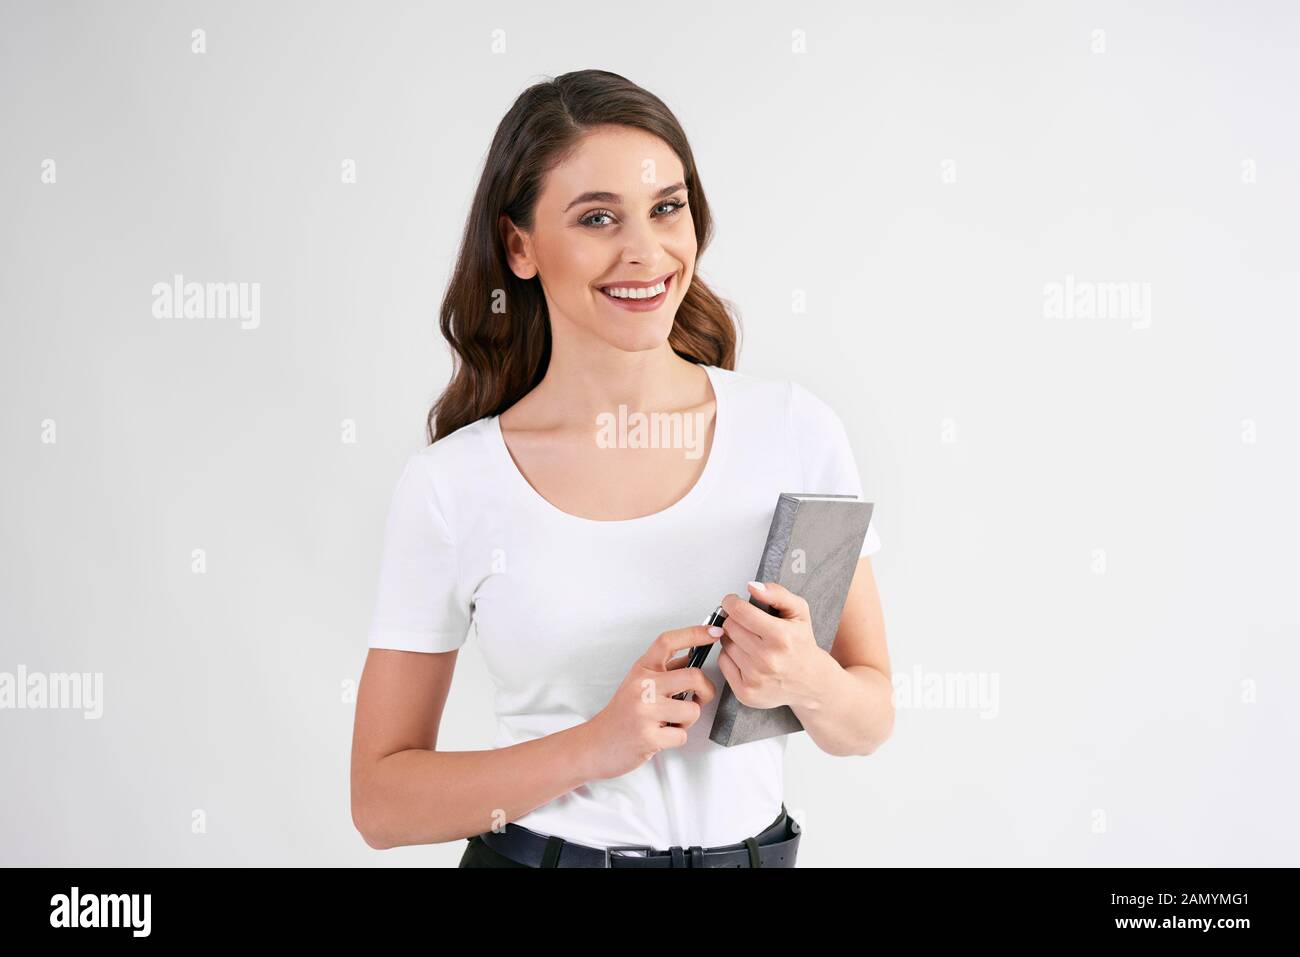 Smiling woman holding a book in studio shot Stock Photo